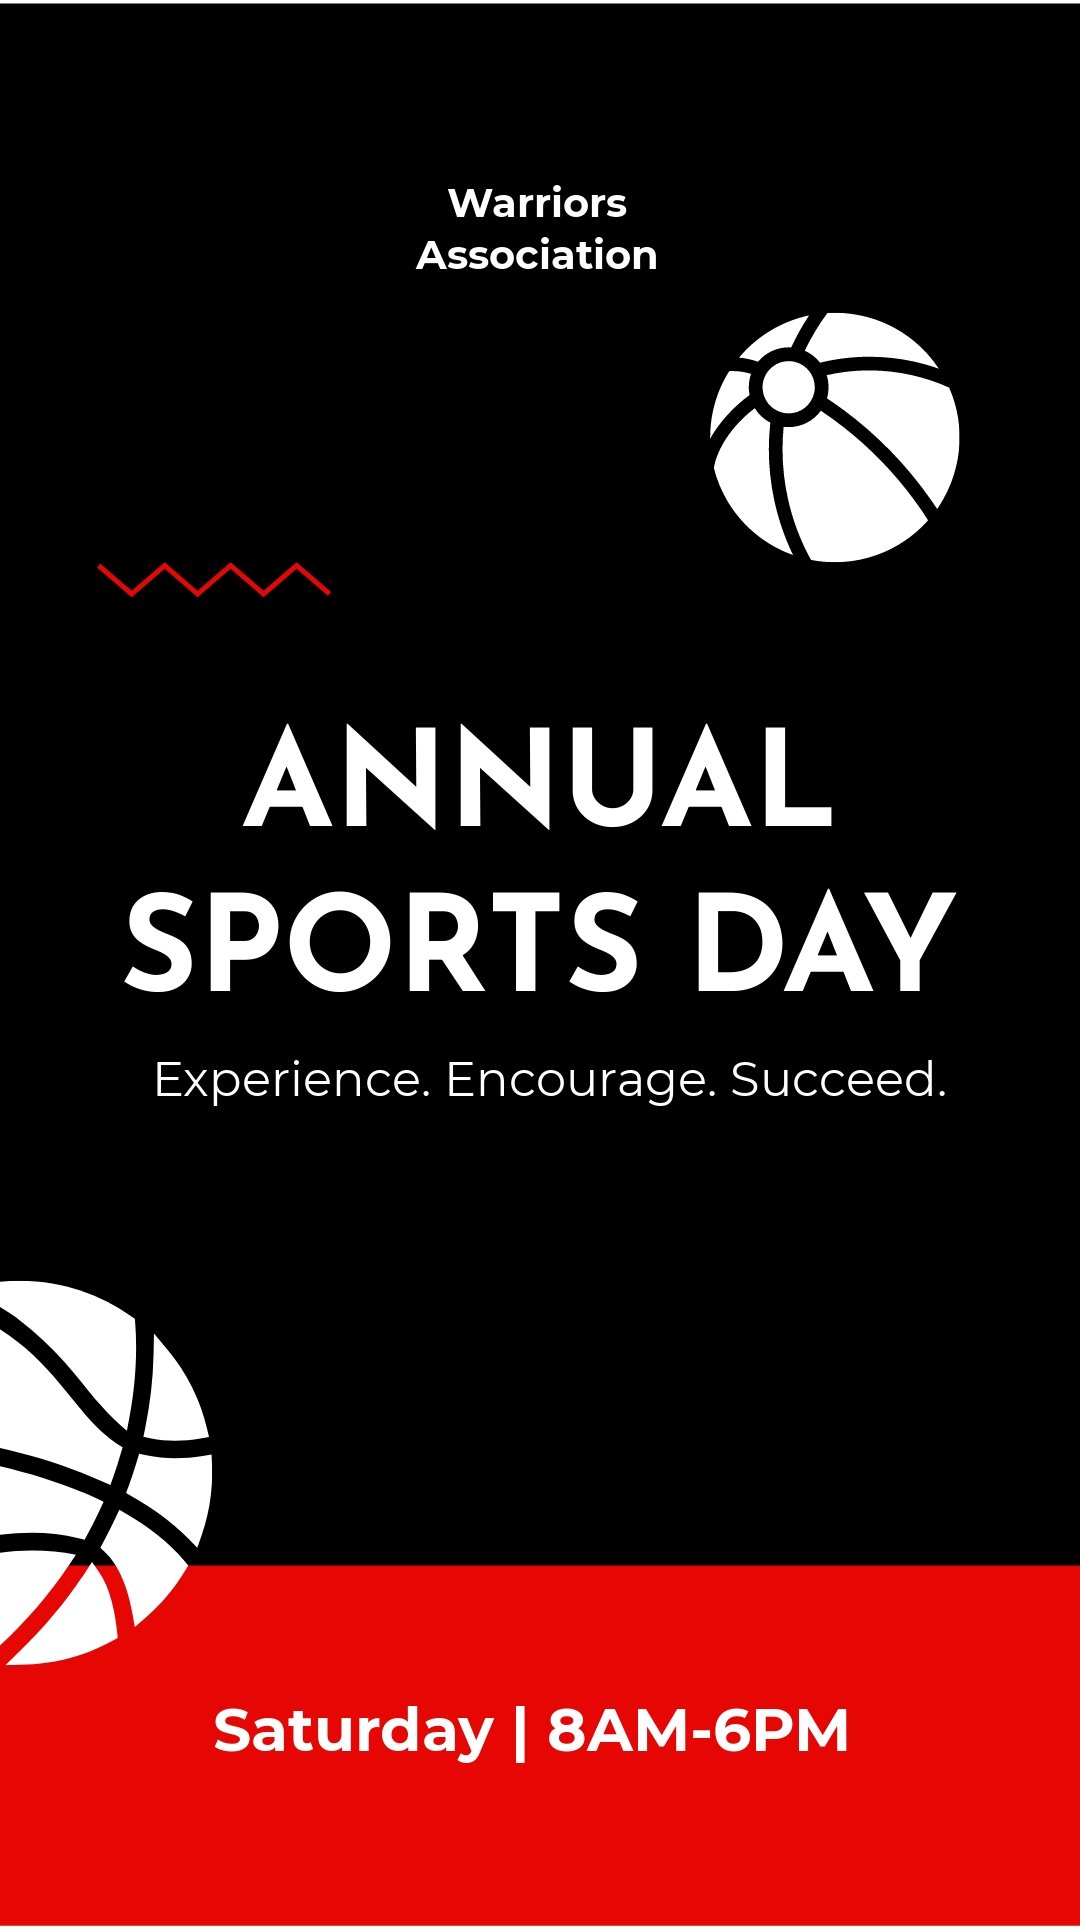 Women in Sports Day - SOMD Virtual MOVEment